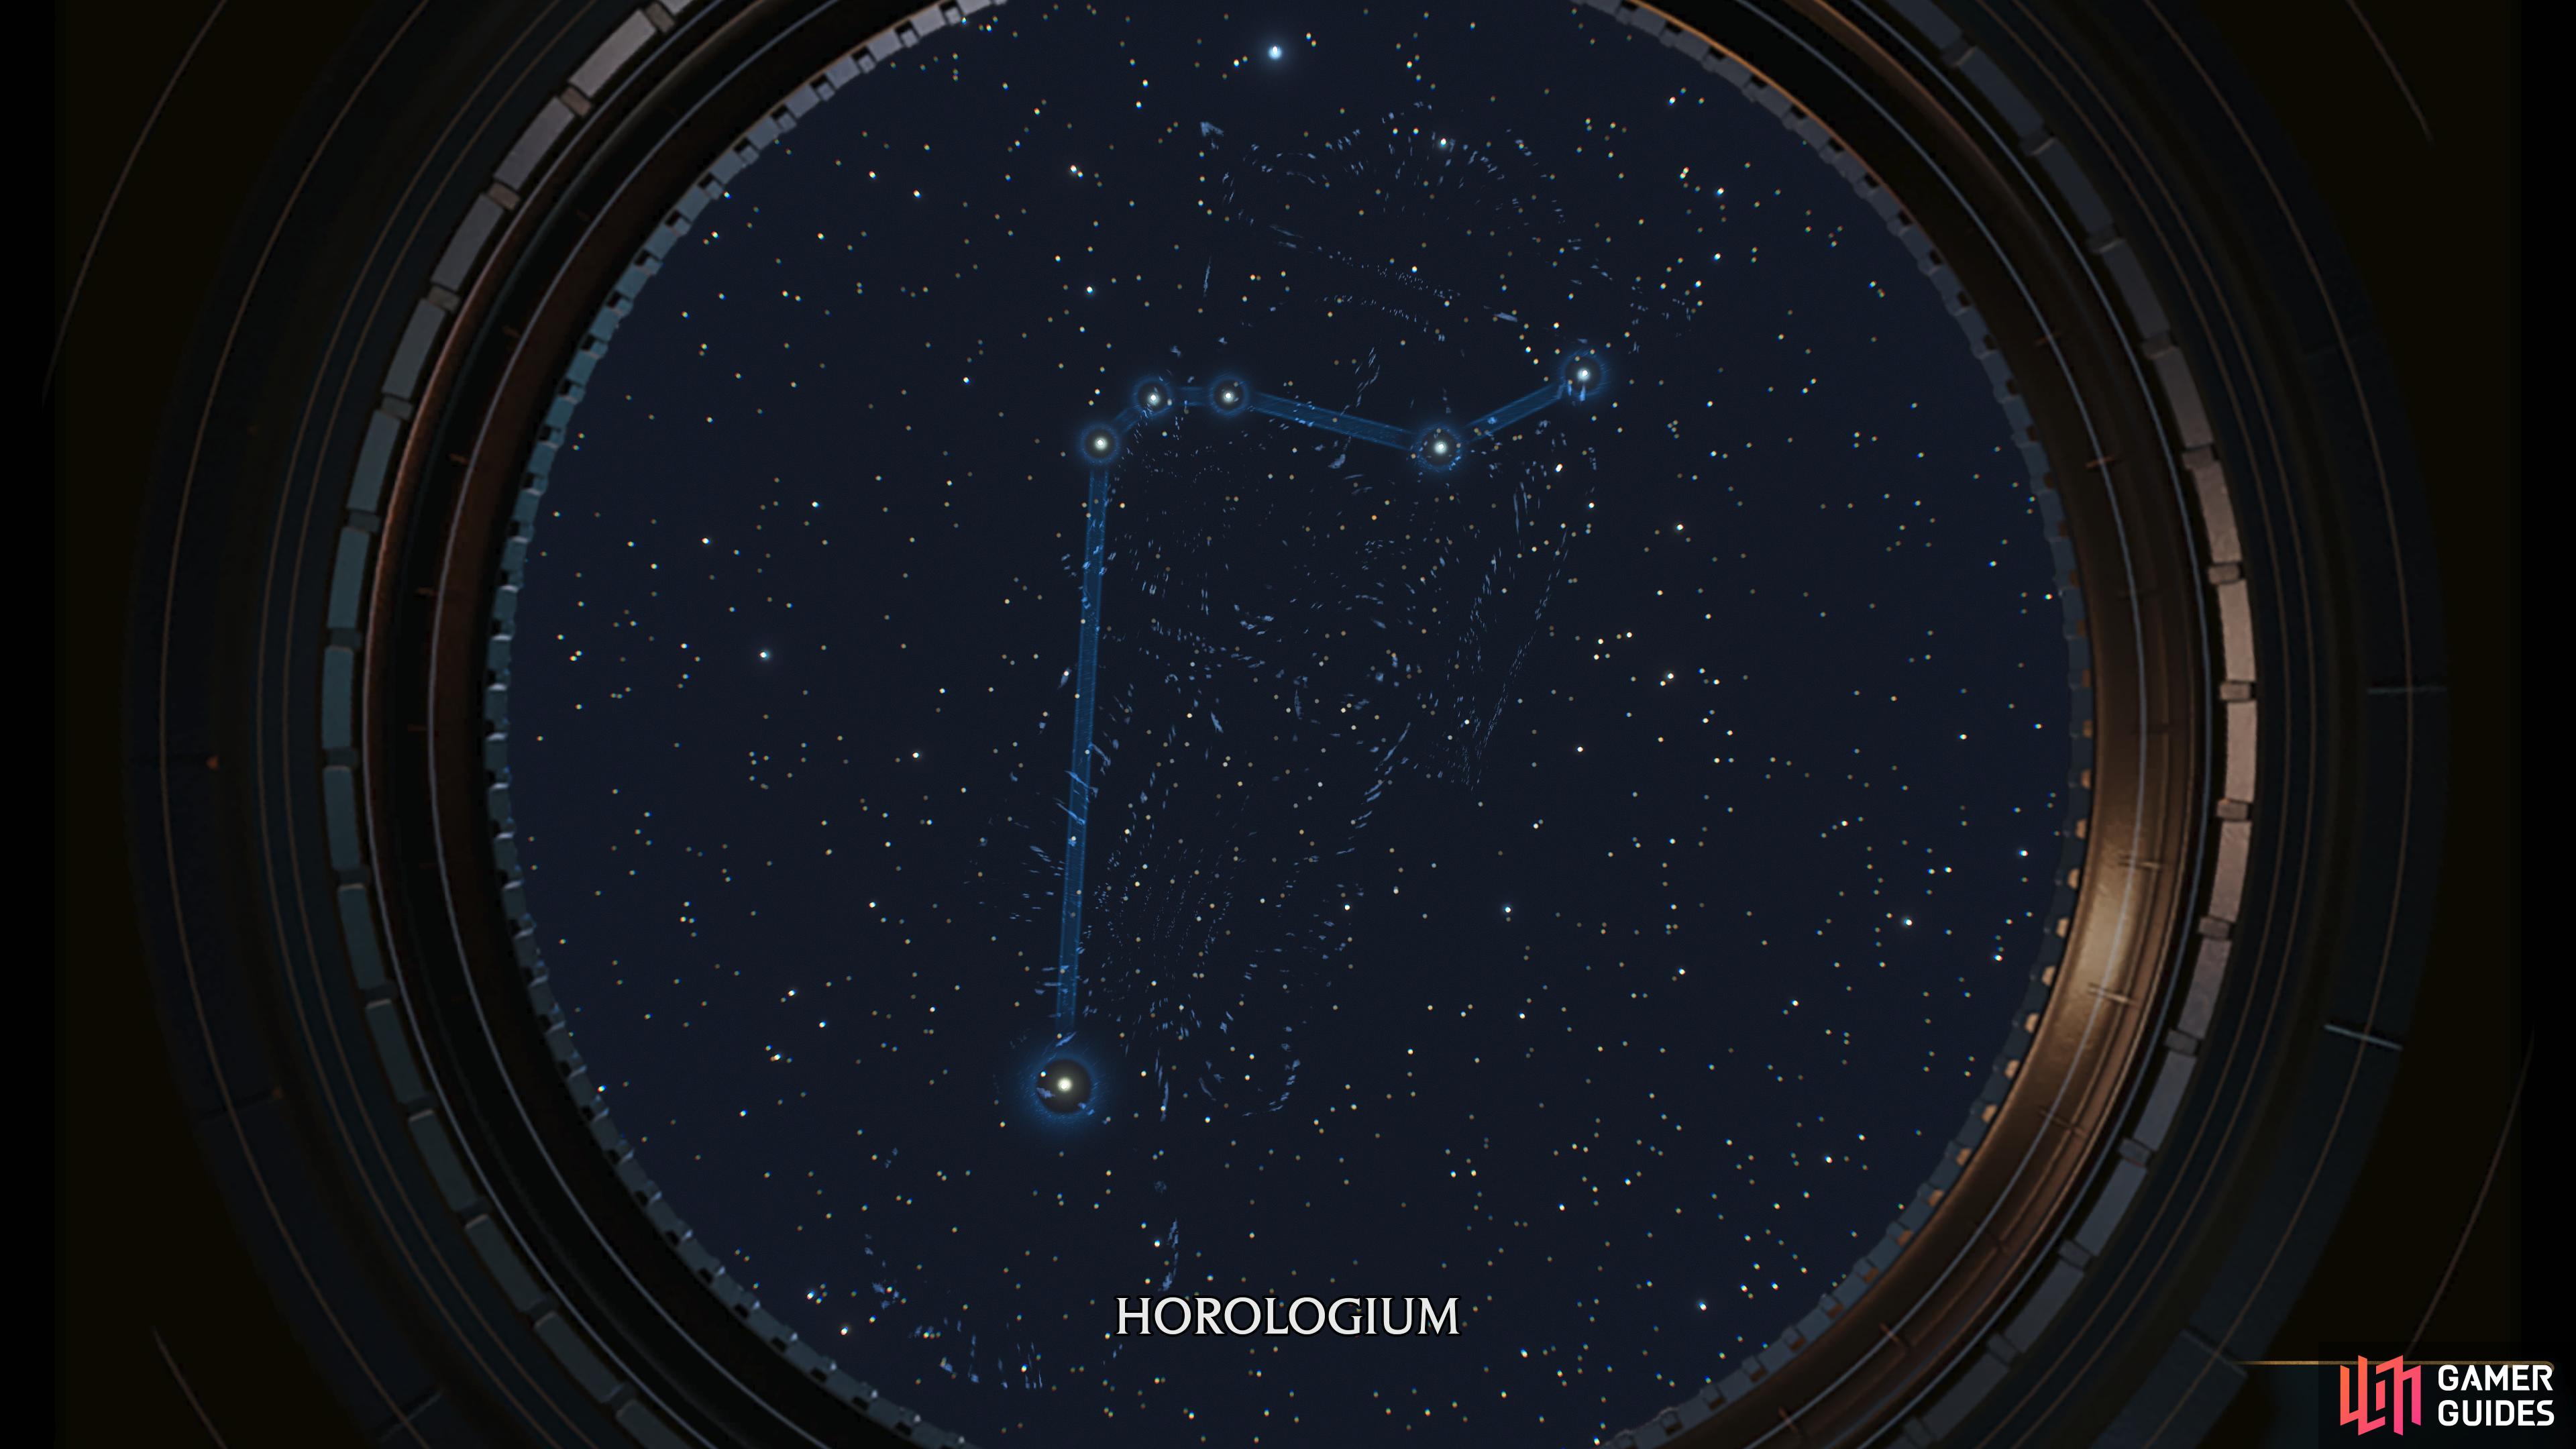 this is the sign for !Horologium.